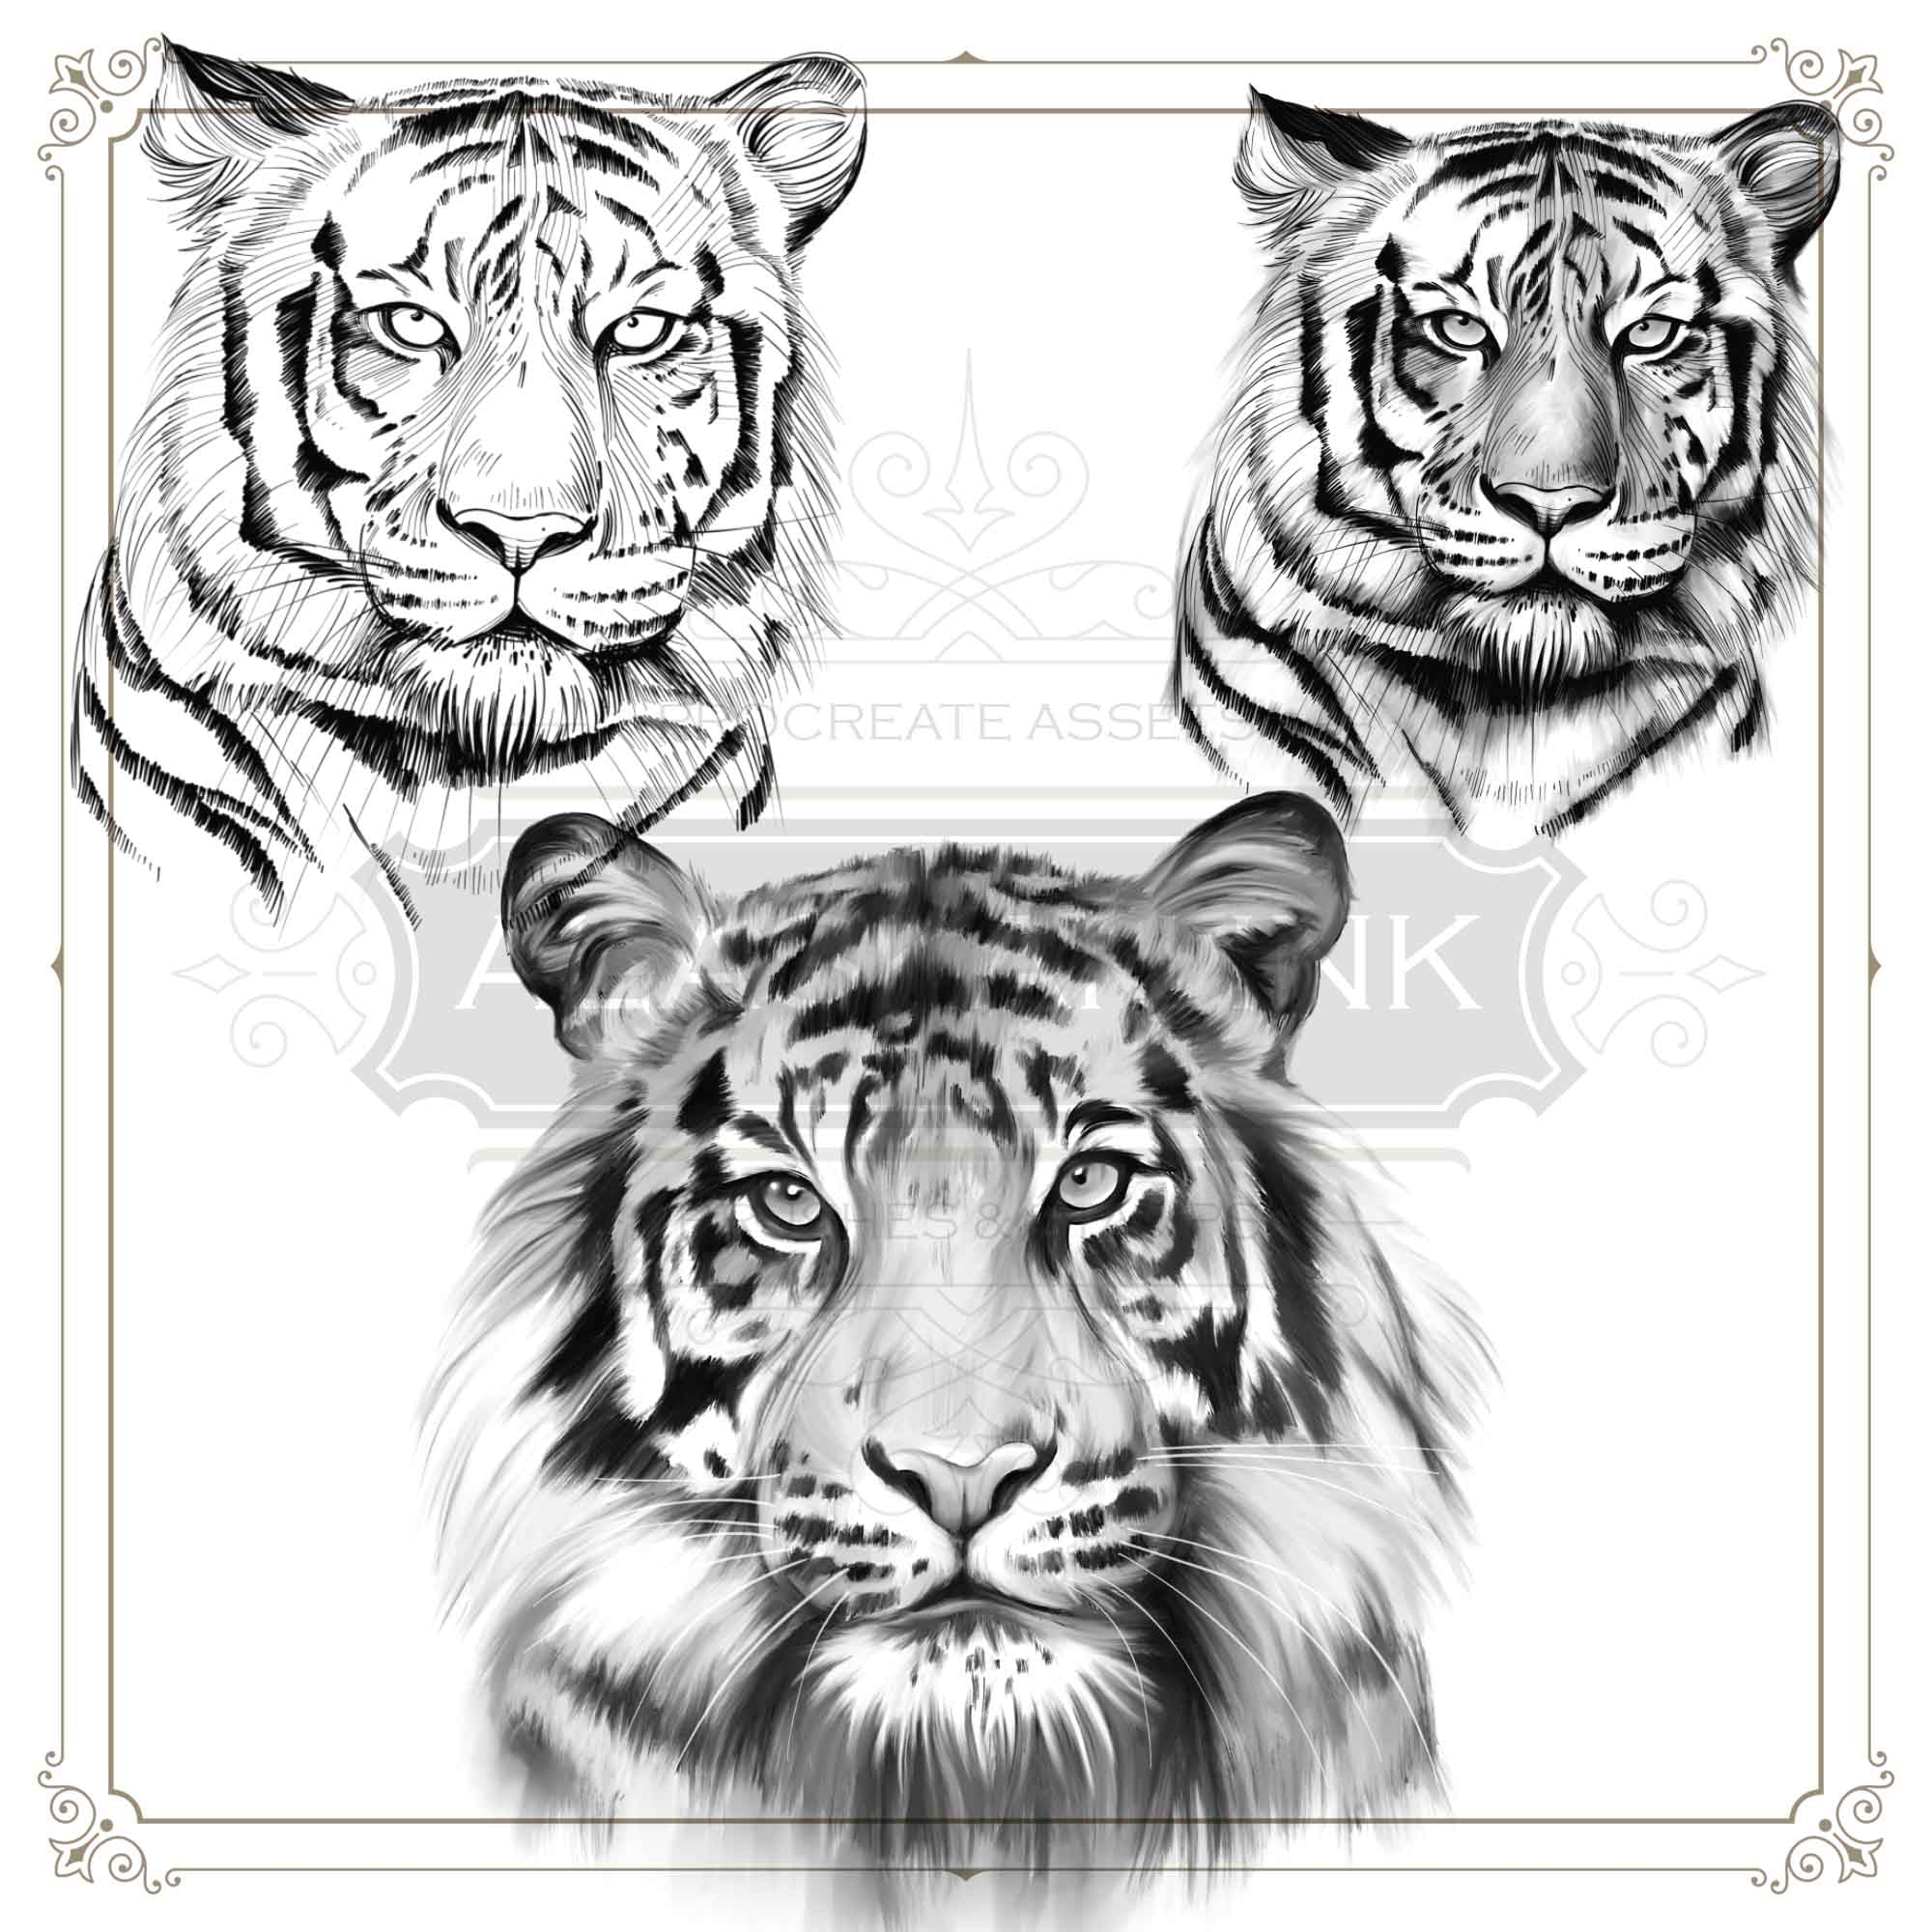 Tiger tattoo flash by Oliver Brechensbauer I Fake tiger Tattoos - Like ink